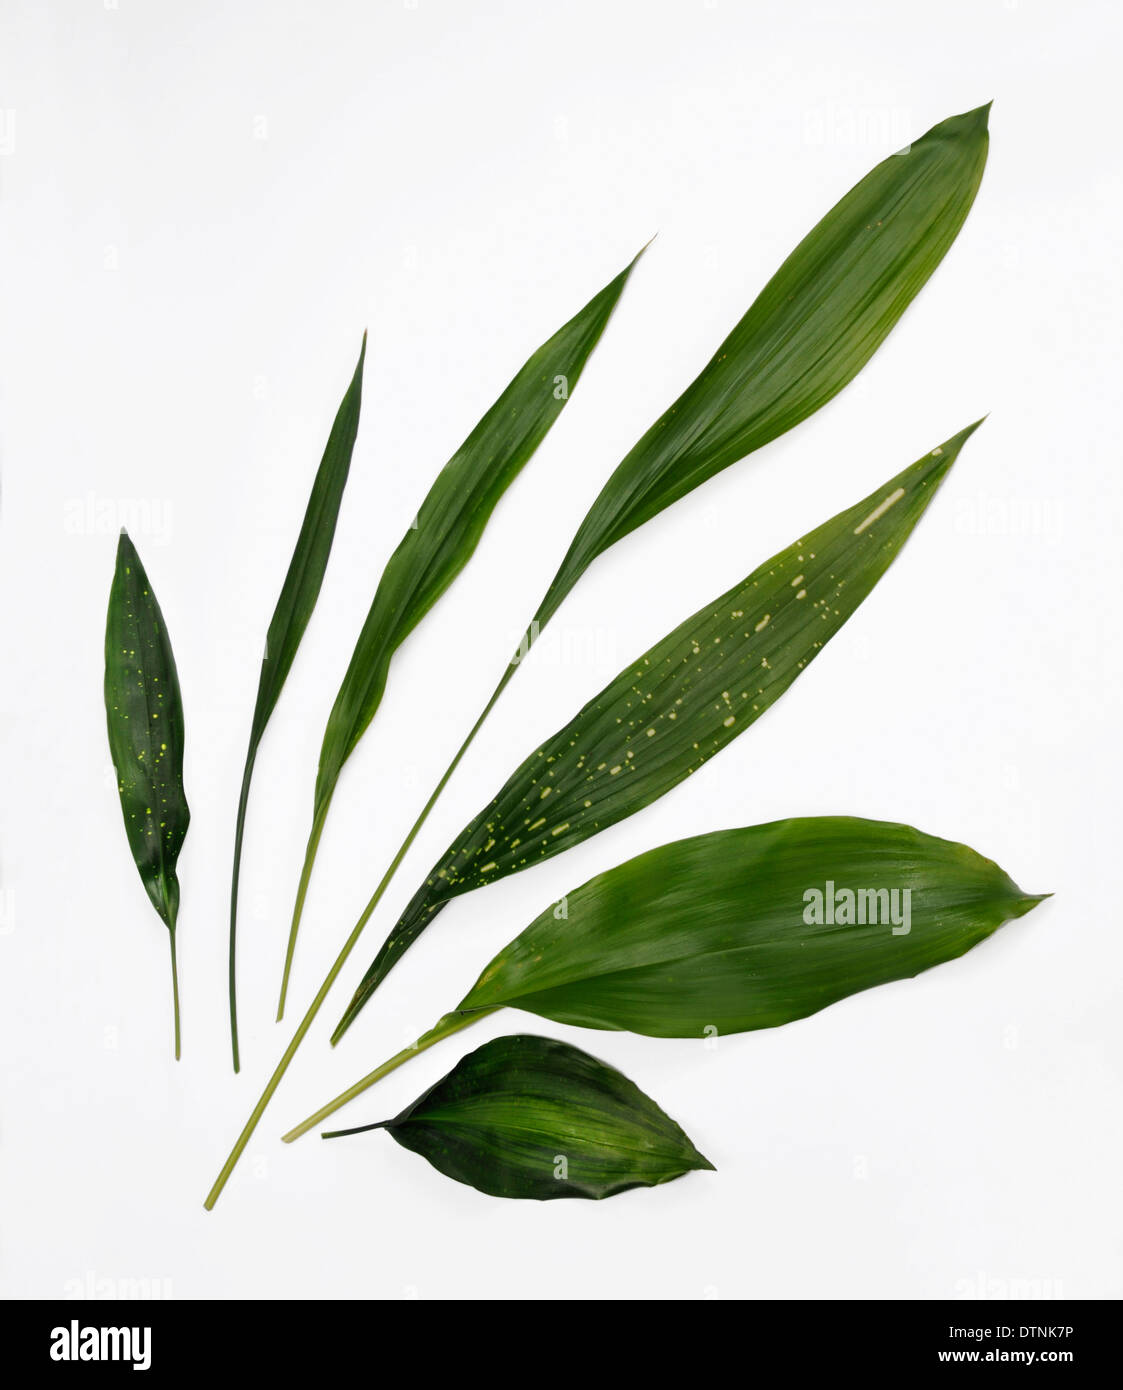 Leaves from different species and varieties of Aspidistra Stock Photo